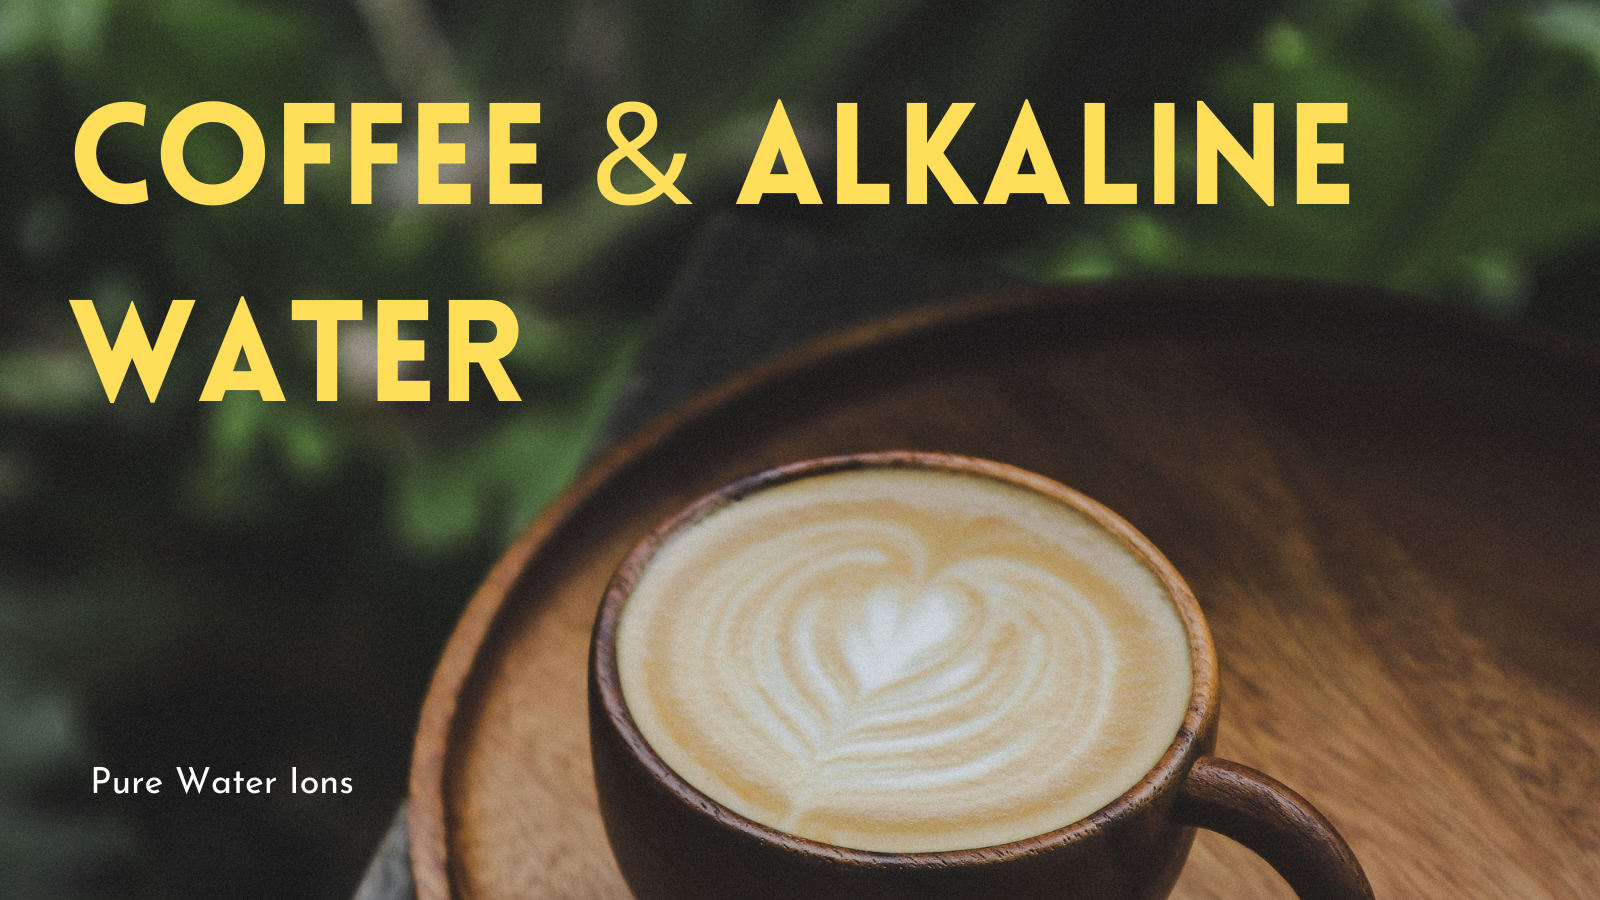 cup of coffee made using alkaline water